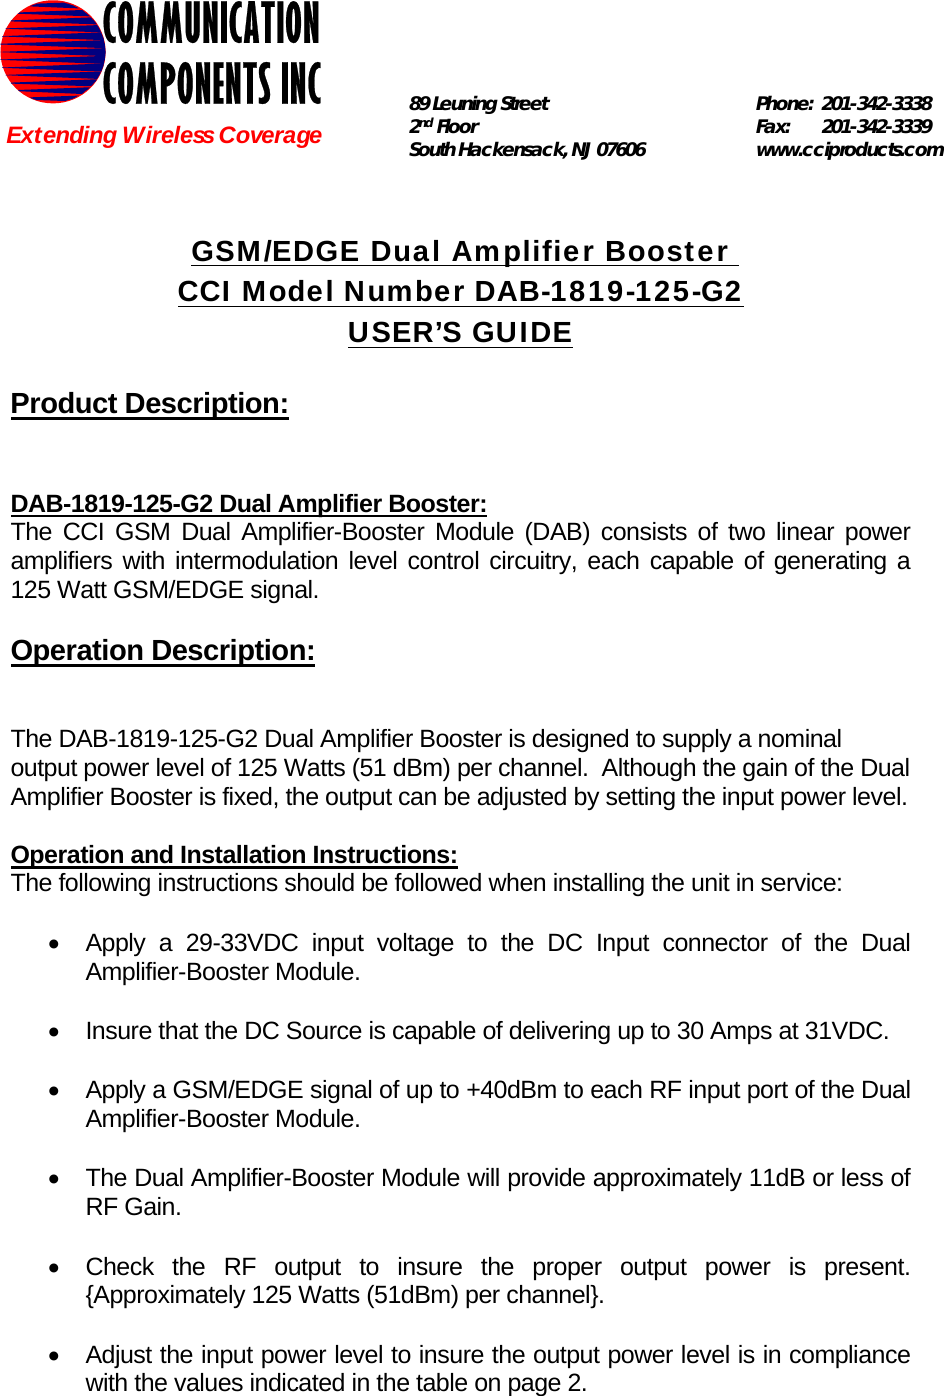   GSM/EDGE Dual Amplifier Booster  CCI Model Number DAB-1819-125-G2 USER’S GUIDE  Product Description:   DAB-1819-125-G2 Dual Amplifier Booster: The CCI GSM Dual Amplifier-Booster Module (DAB) consists of two linear power amplifiers with intermodulation level control circuitry, each capable of generating a 125 Watt GSM/EDGE signal.    Operation Description:   The DAB-1819-125-G2 Dual Amplifier Booster is designed to supply a nominal output power level of 125 Watts (51 dBm) per channel.  Although the gain of the Dual Amplifier Booster is fixed, the output can be adjusted by setting the input power level.    Operation and Installation Instructions: The following instructions should be followed when installing the unit in service:  •  Apply a 29-33VDC input voltage to the DC Input connector of the Dual Amplifier-Booster Module.  •  Insure that the DC Source is capable of delivering up to 30 Amps at 31VDC.  •  Apply a GSM/EDGE signal of up to +40dBm to each RF input port of the Dual Amplifier-Booster Module.  •  The Dual Amplifier-Booster Module will provide approximately 11dB or less of RF Gain.  •  Check the RF output to insure the proper output power is present. {Approximately 125 Watts (51dBm) per channel}.  •  Adjust the input power level to insure the output power level is in compliance with the values indicated in the table on page 2. COMMUNICATION COMPONENTS INC Extending Wireless Coverage 89 Leuning Street   Phone: 201-342-3338 2nd Floor  Fax:   201-342-3339 South Hackensack, NJ 07606   www.cciproducts.com  